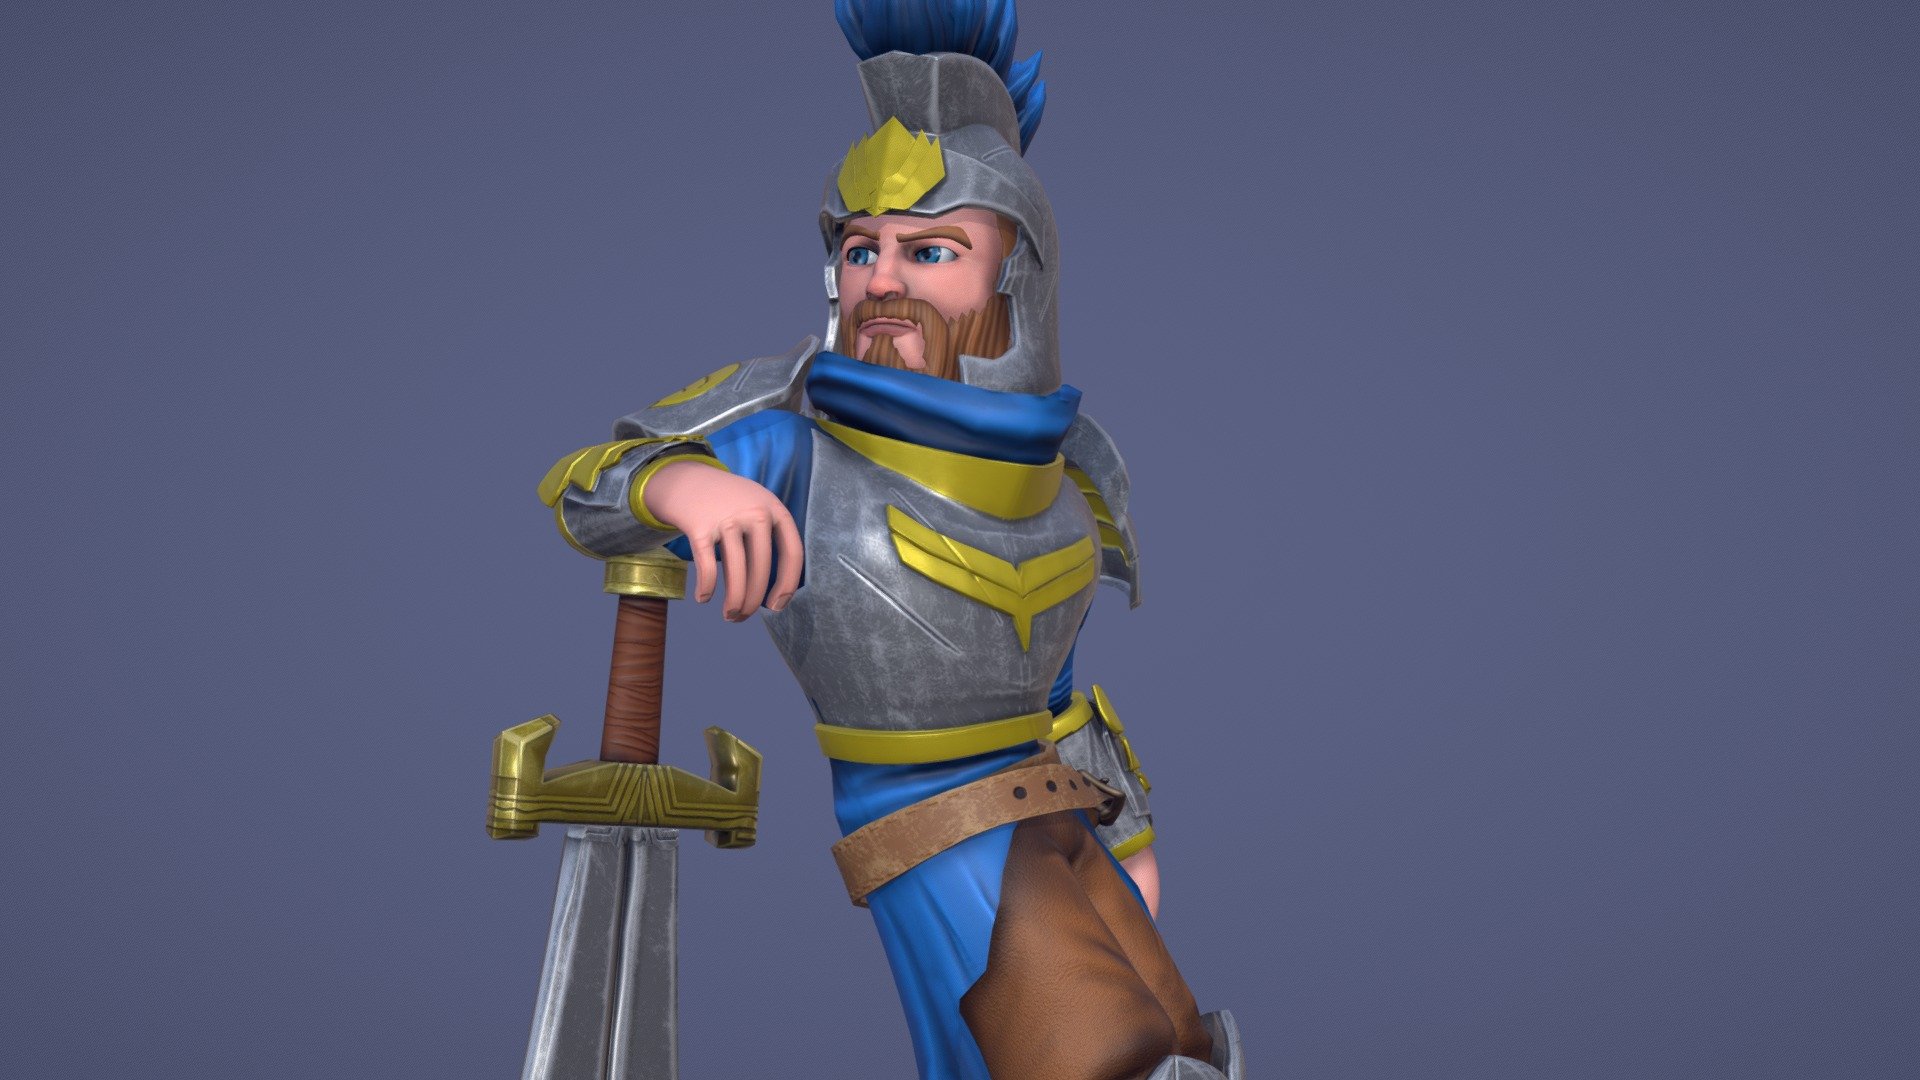 Character from Cassiodora

Wishlist Now on Steam: https://store.steampowered.com/agecheck/app/1708550/ - Colden - 3D model by paulo_nathan 3d model